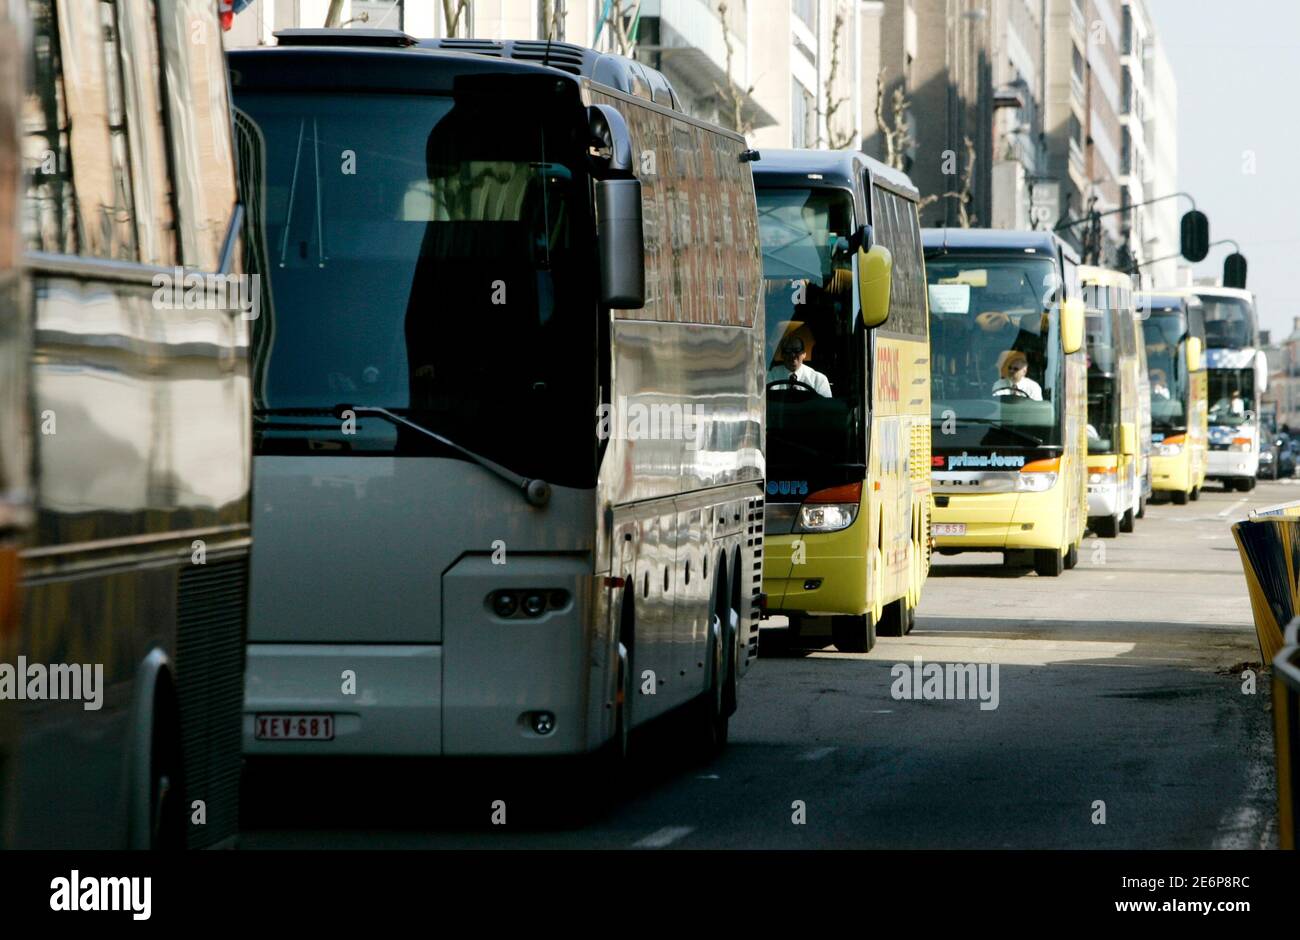 Coaches drive to the the European Commission headquarters in Brussels, in protest against new European Union working time limits for drivers that they say would deal a big blow to the coach travel industry, March 14, 2007.    REUTERS/Francois Lenoir  (BELGIUM) Stock Photo